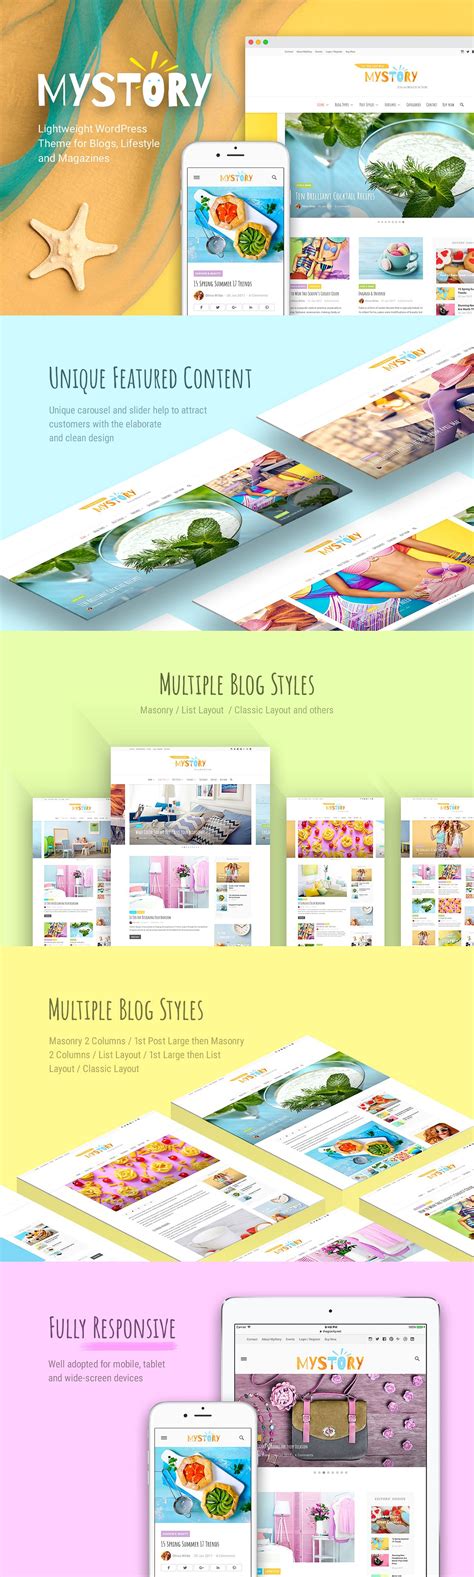 Colorful Wordpress Theme For Your Blog Mystory Blog And Magazine